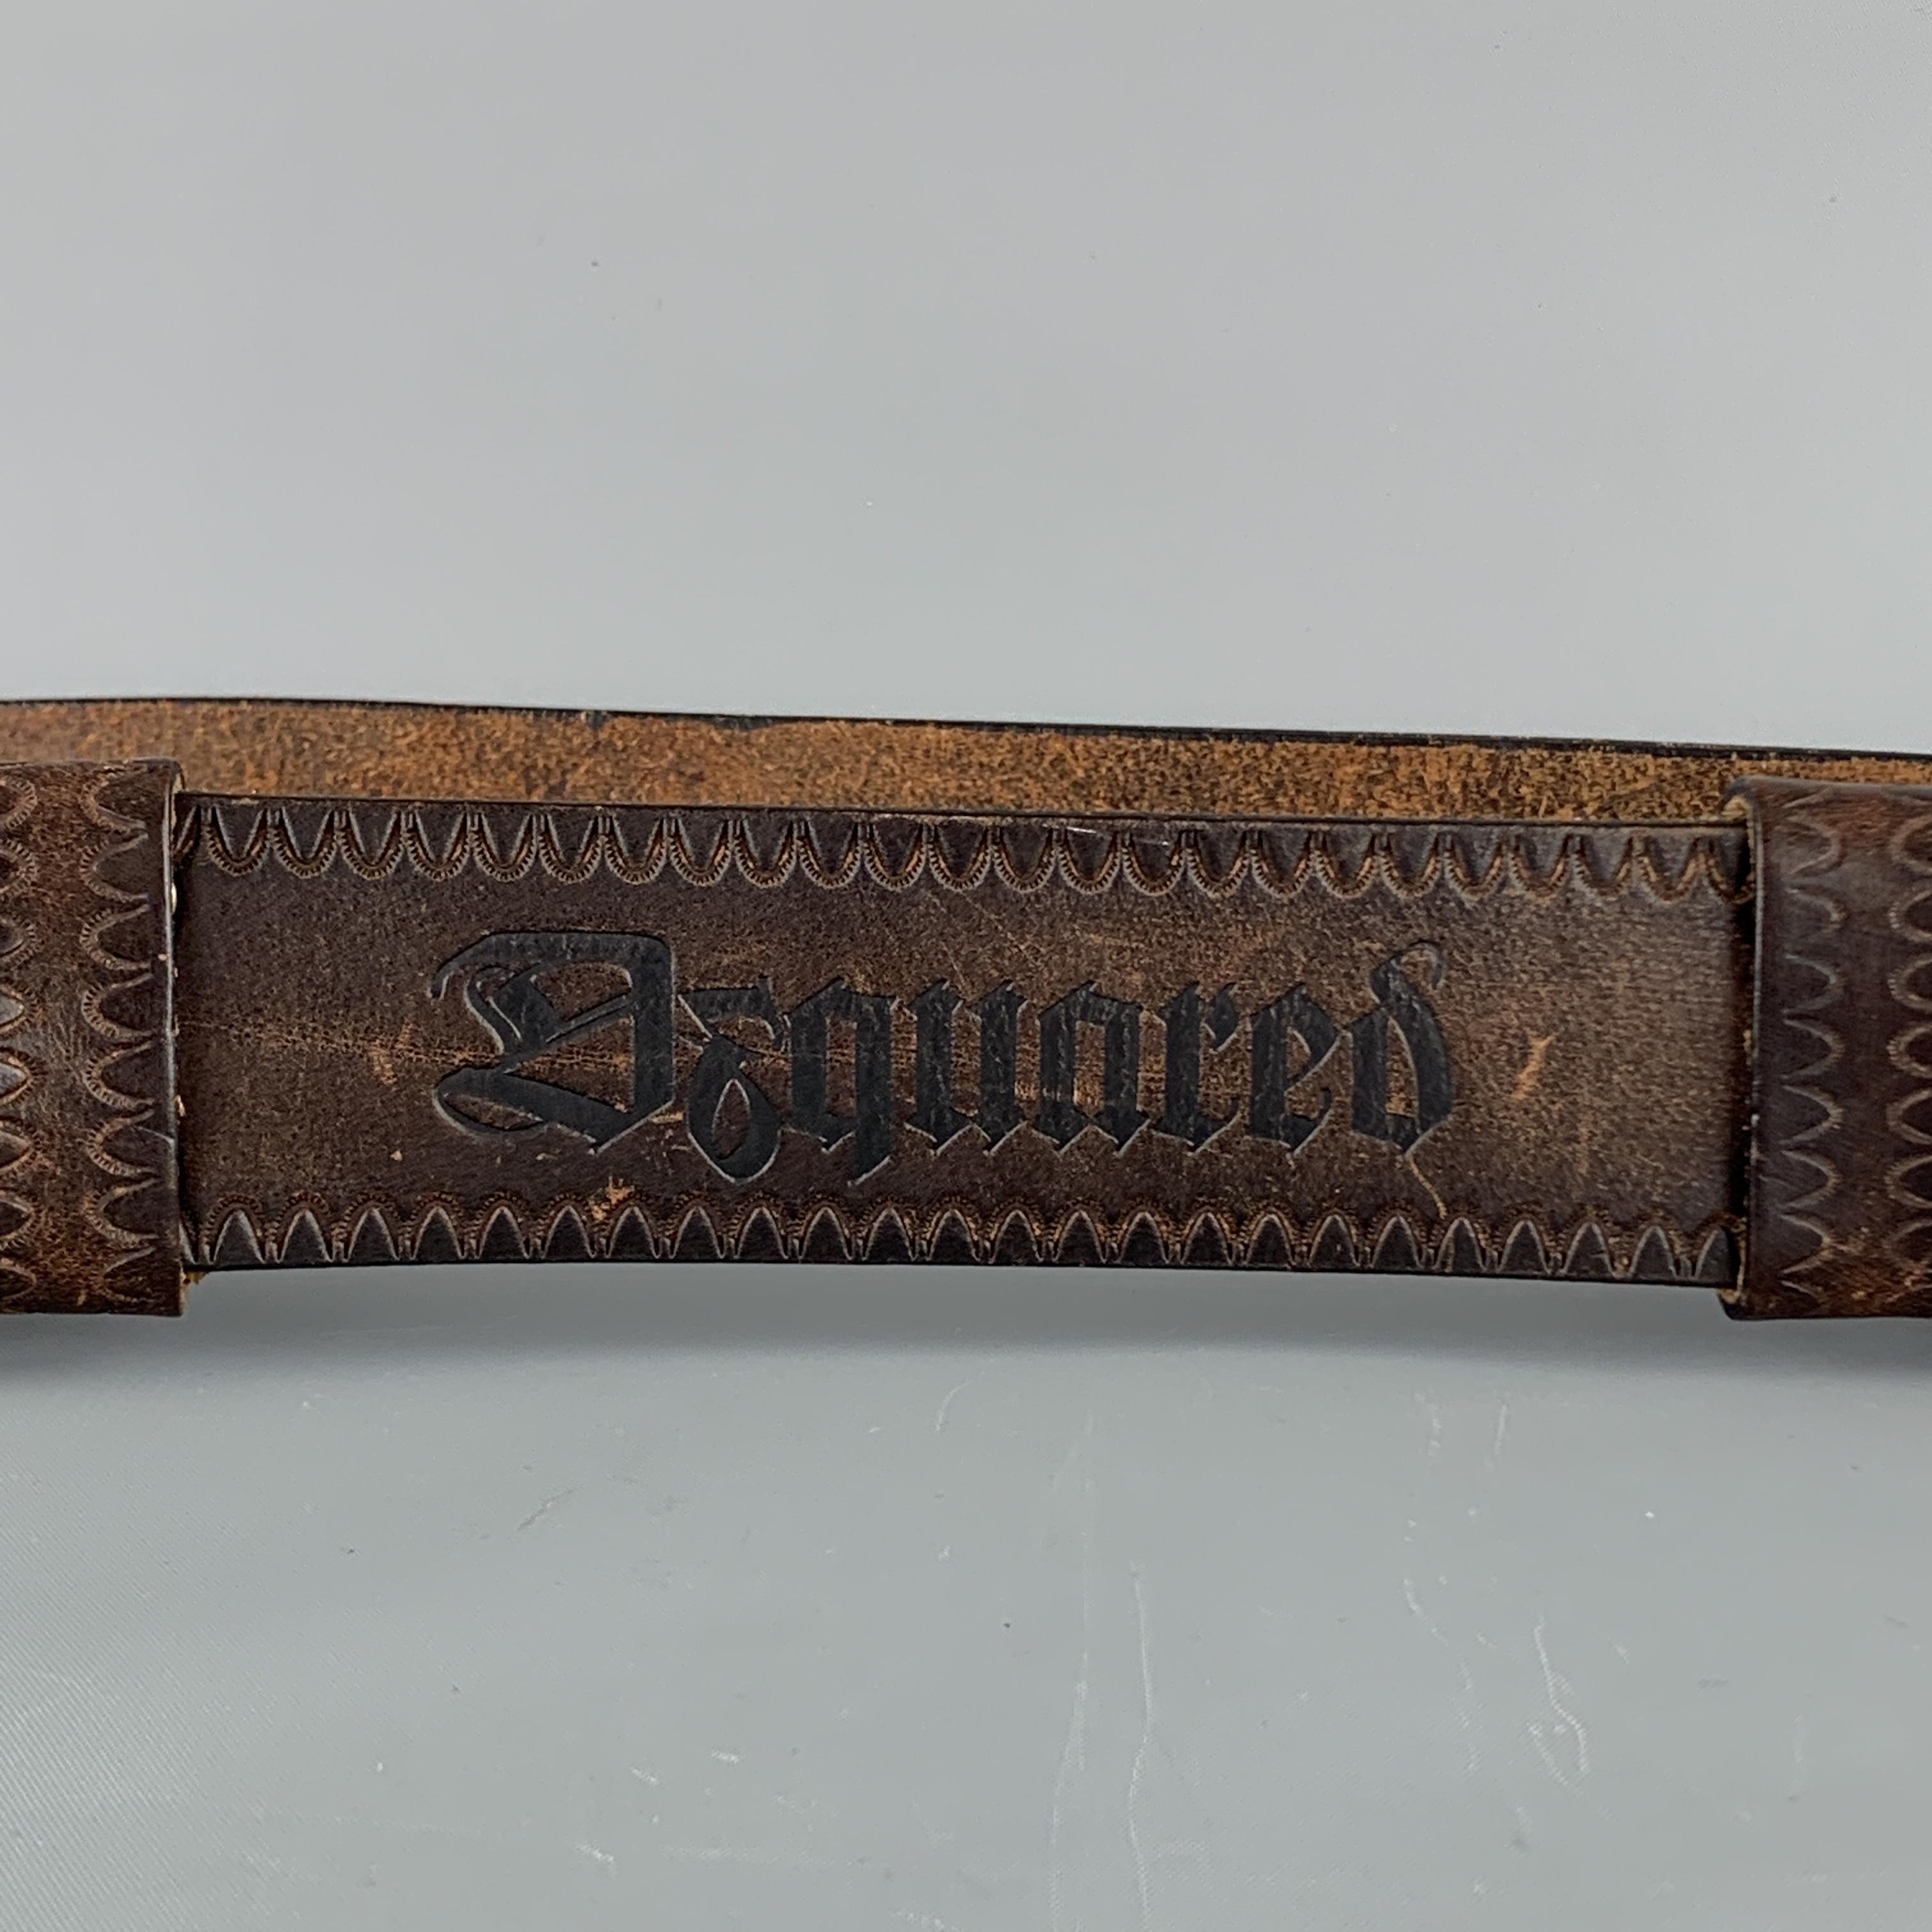 DSQUARED2 belt features a brown distressed leather strap with double loop adjustable double loop closures and embossed trim and logo. Made in Italy.

Very Good Pre-Owned Condition.
Marked: M

Width: 1.75 in.
Maximum Fit: 38.5 in.